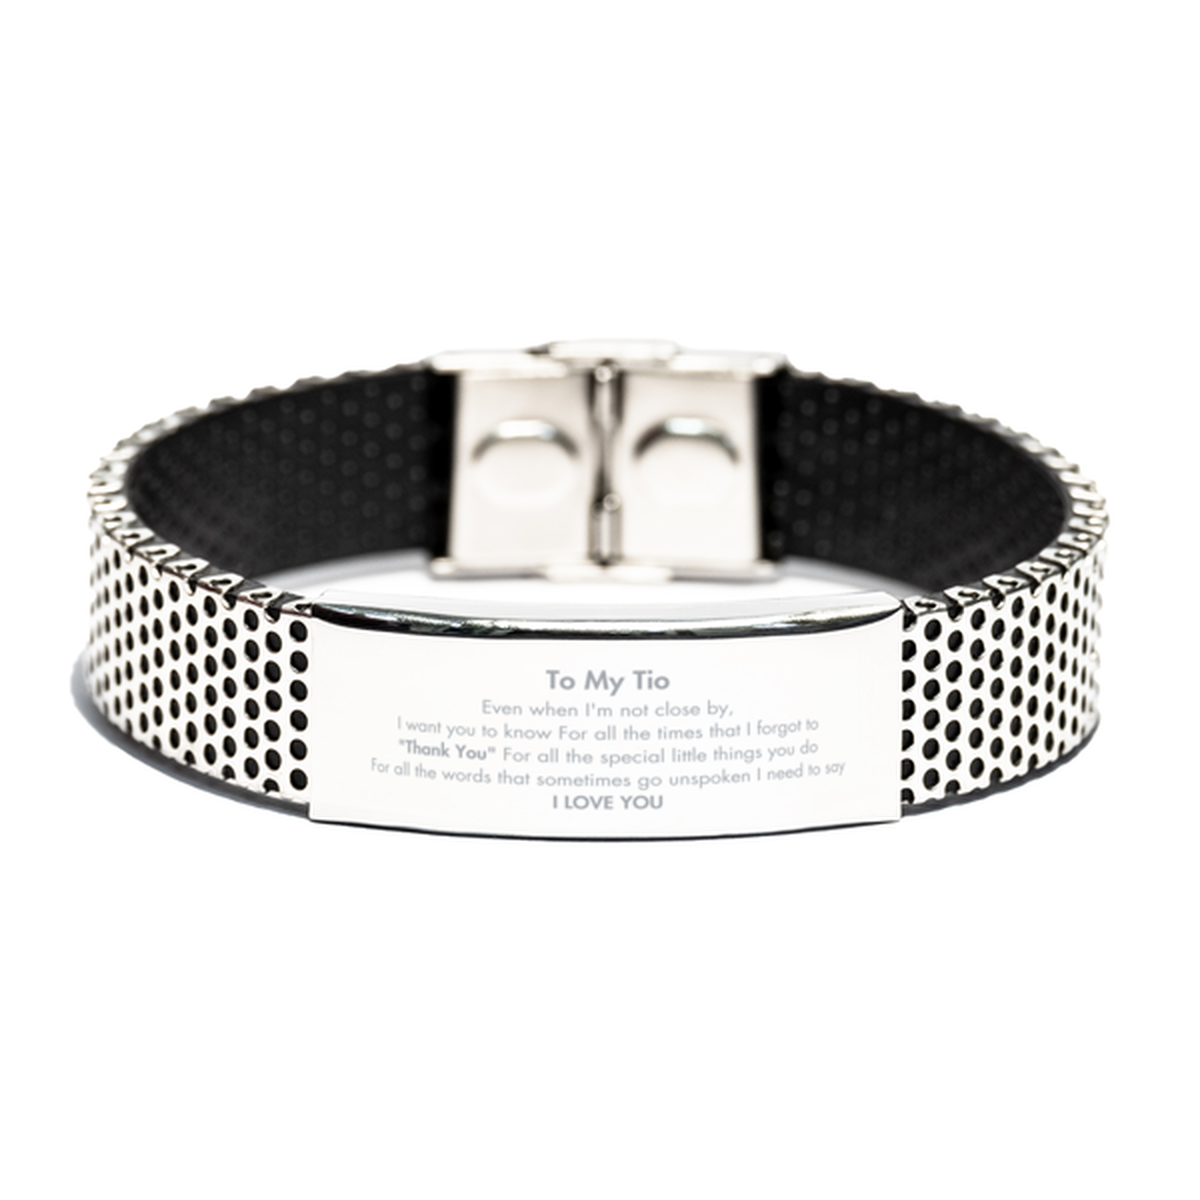 Thank You Gifts for Tio, Keepsake Stainless Steel Bracelet Gifts for Tio Birthday Mother's day Father's Day Tio For all the words That sometimes go unspoken I need to say I LOVE YOU